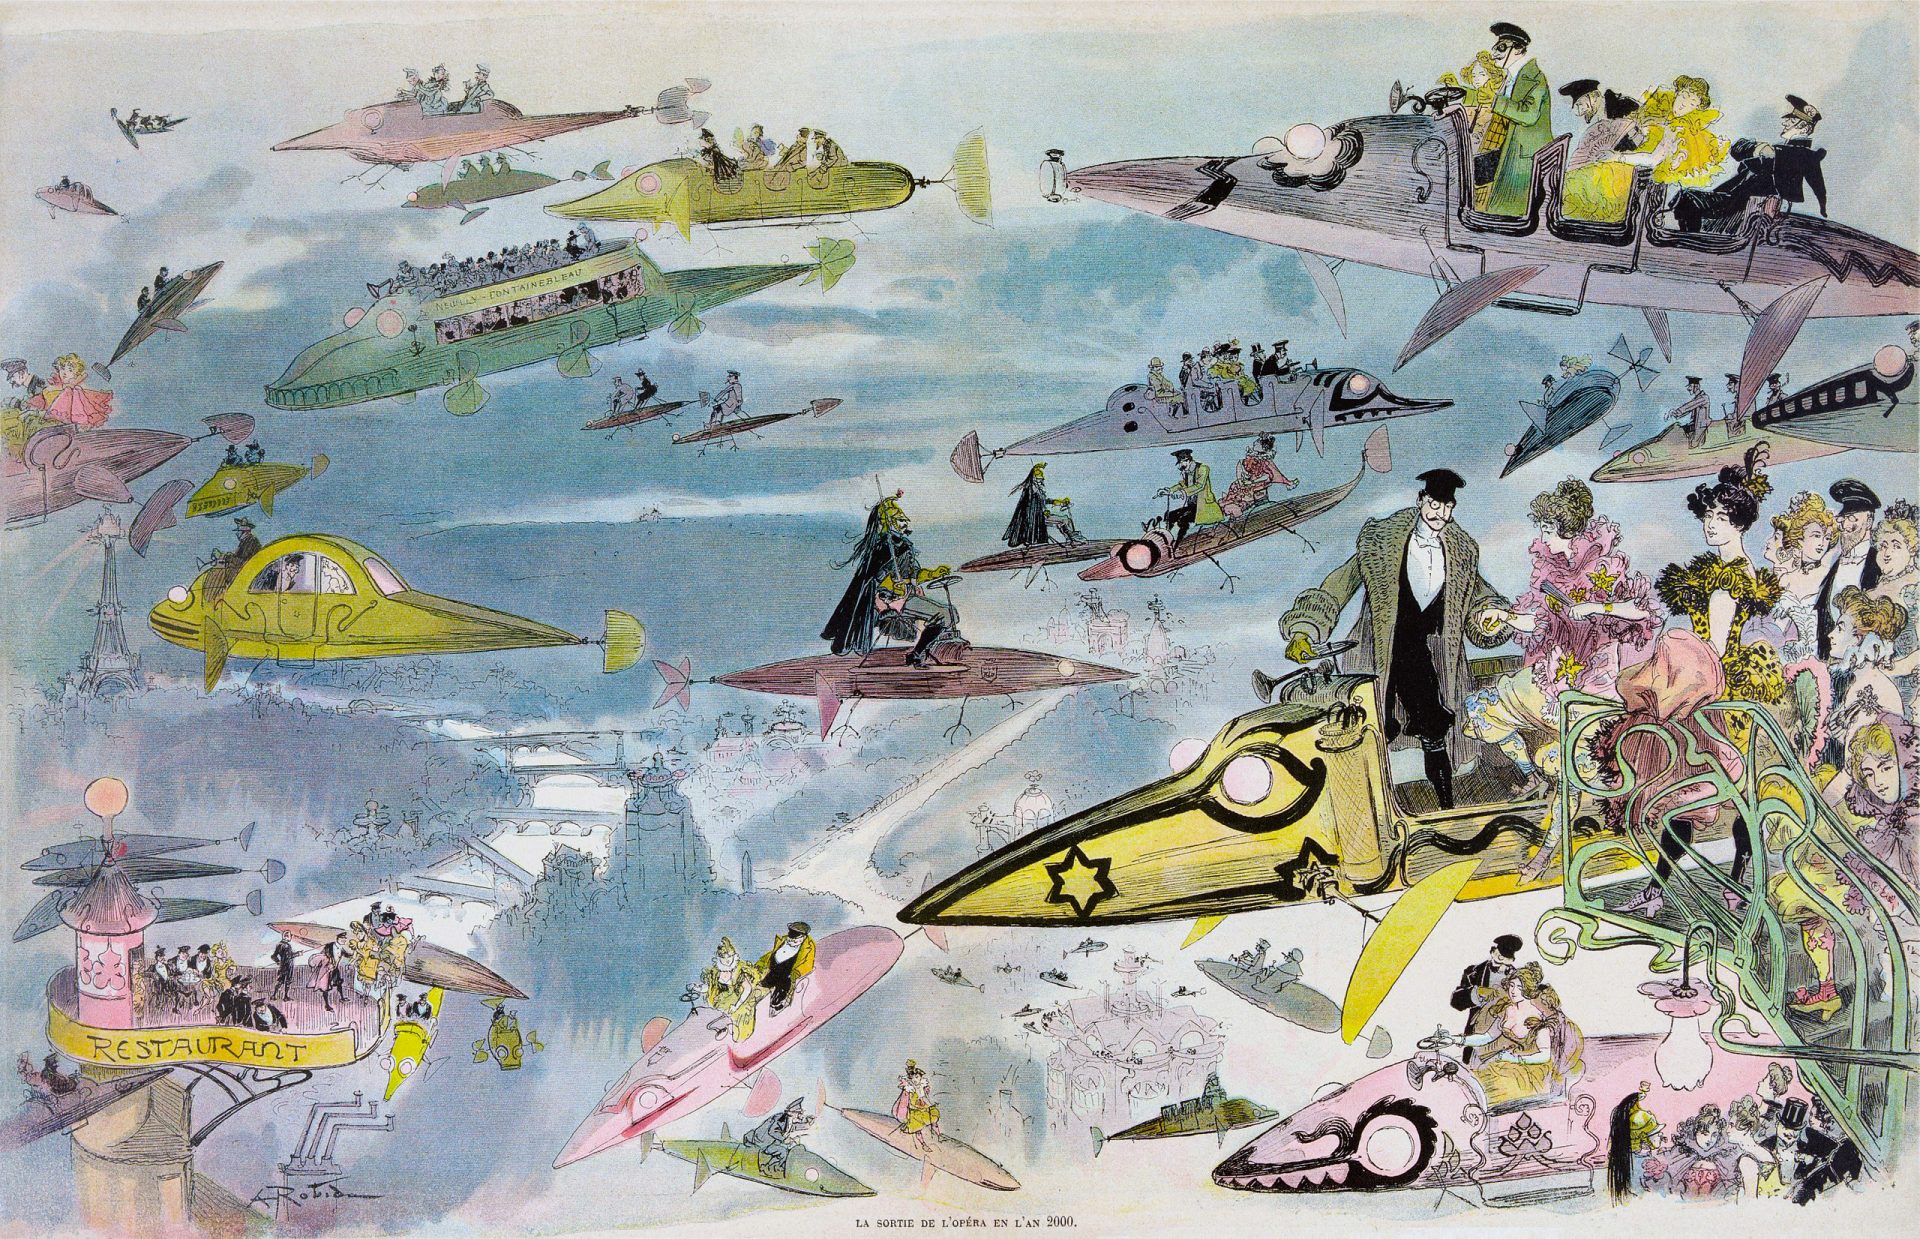 Futuristic lithograph of air travel over Paris, depicting various aircrafts including buses, limousines, and personal vehicles. Women pilot their own crafts while police monitor from above. Hand-colored print.